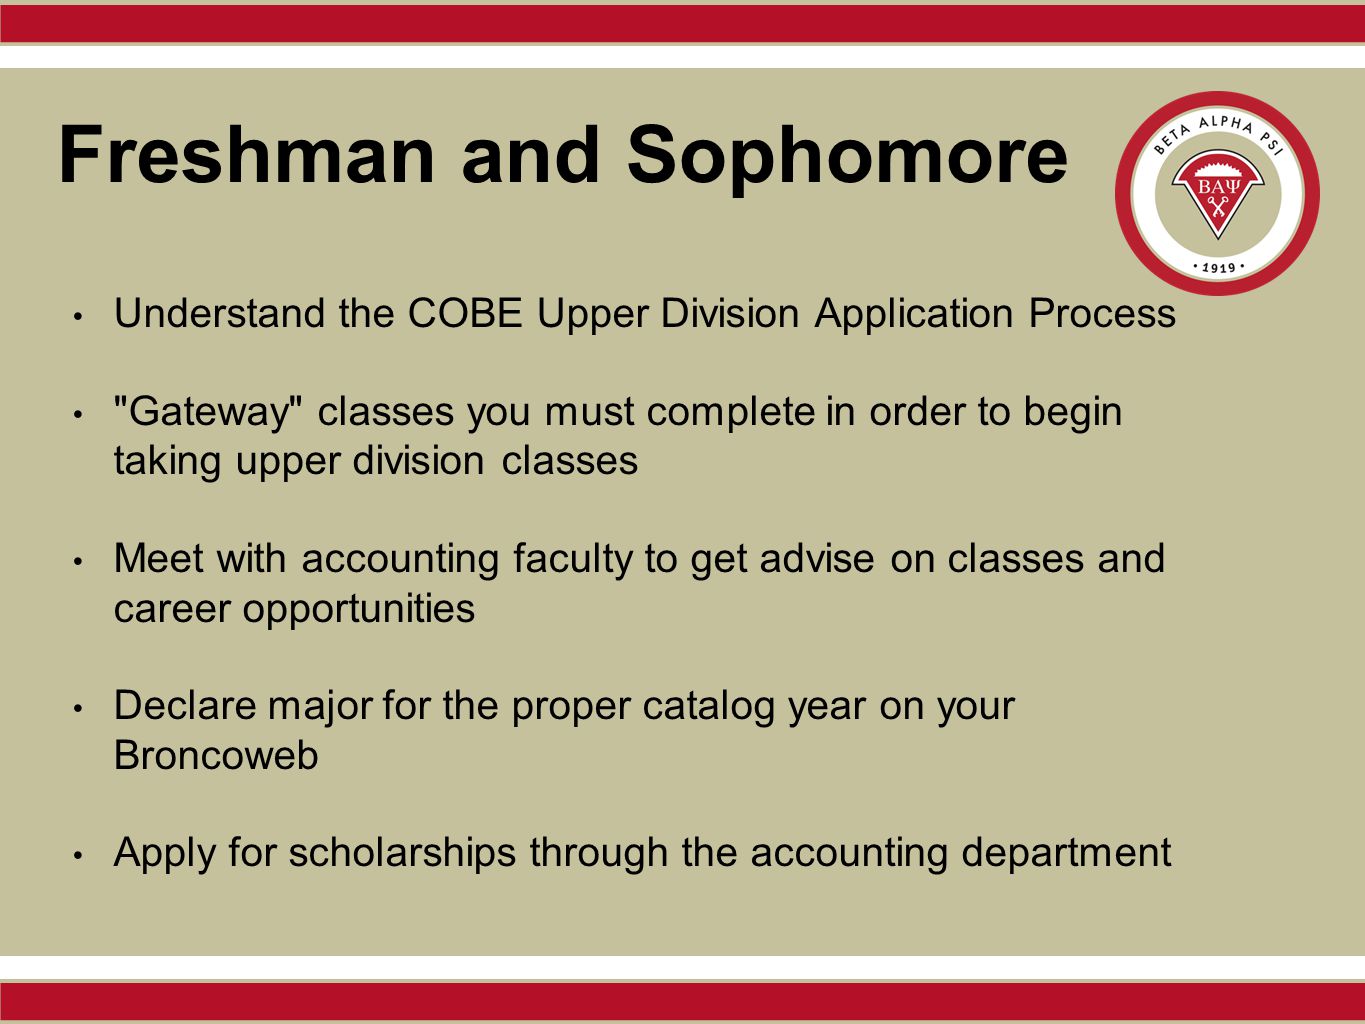 Freshman and Sophomore Understand the COBE Upper Division Application Process Gateway classes you must complete in order to begin taking upper division classes Meet with accounting faculty to get advise on classes and career opportunities Declare major for the proper catalog year on your Broncoweb Apply for scholarships through the accounting department